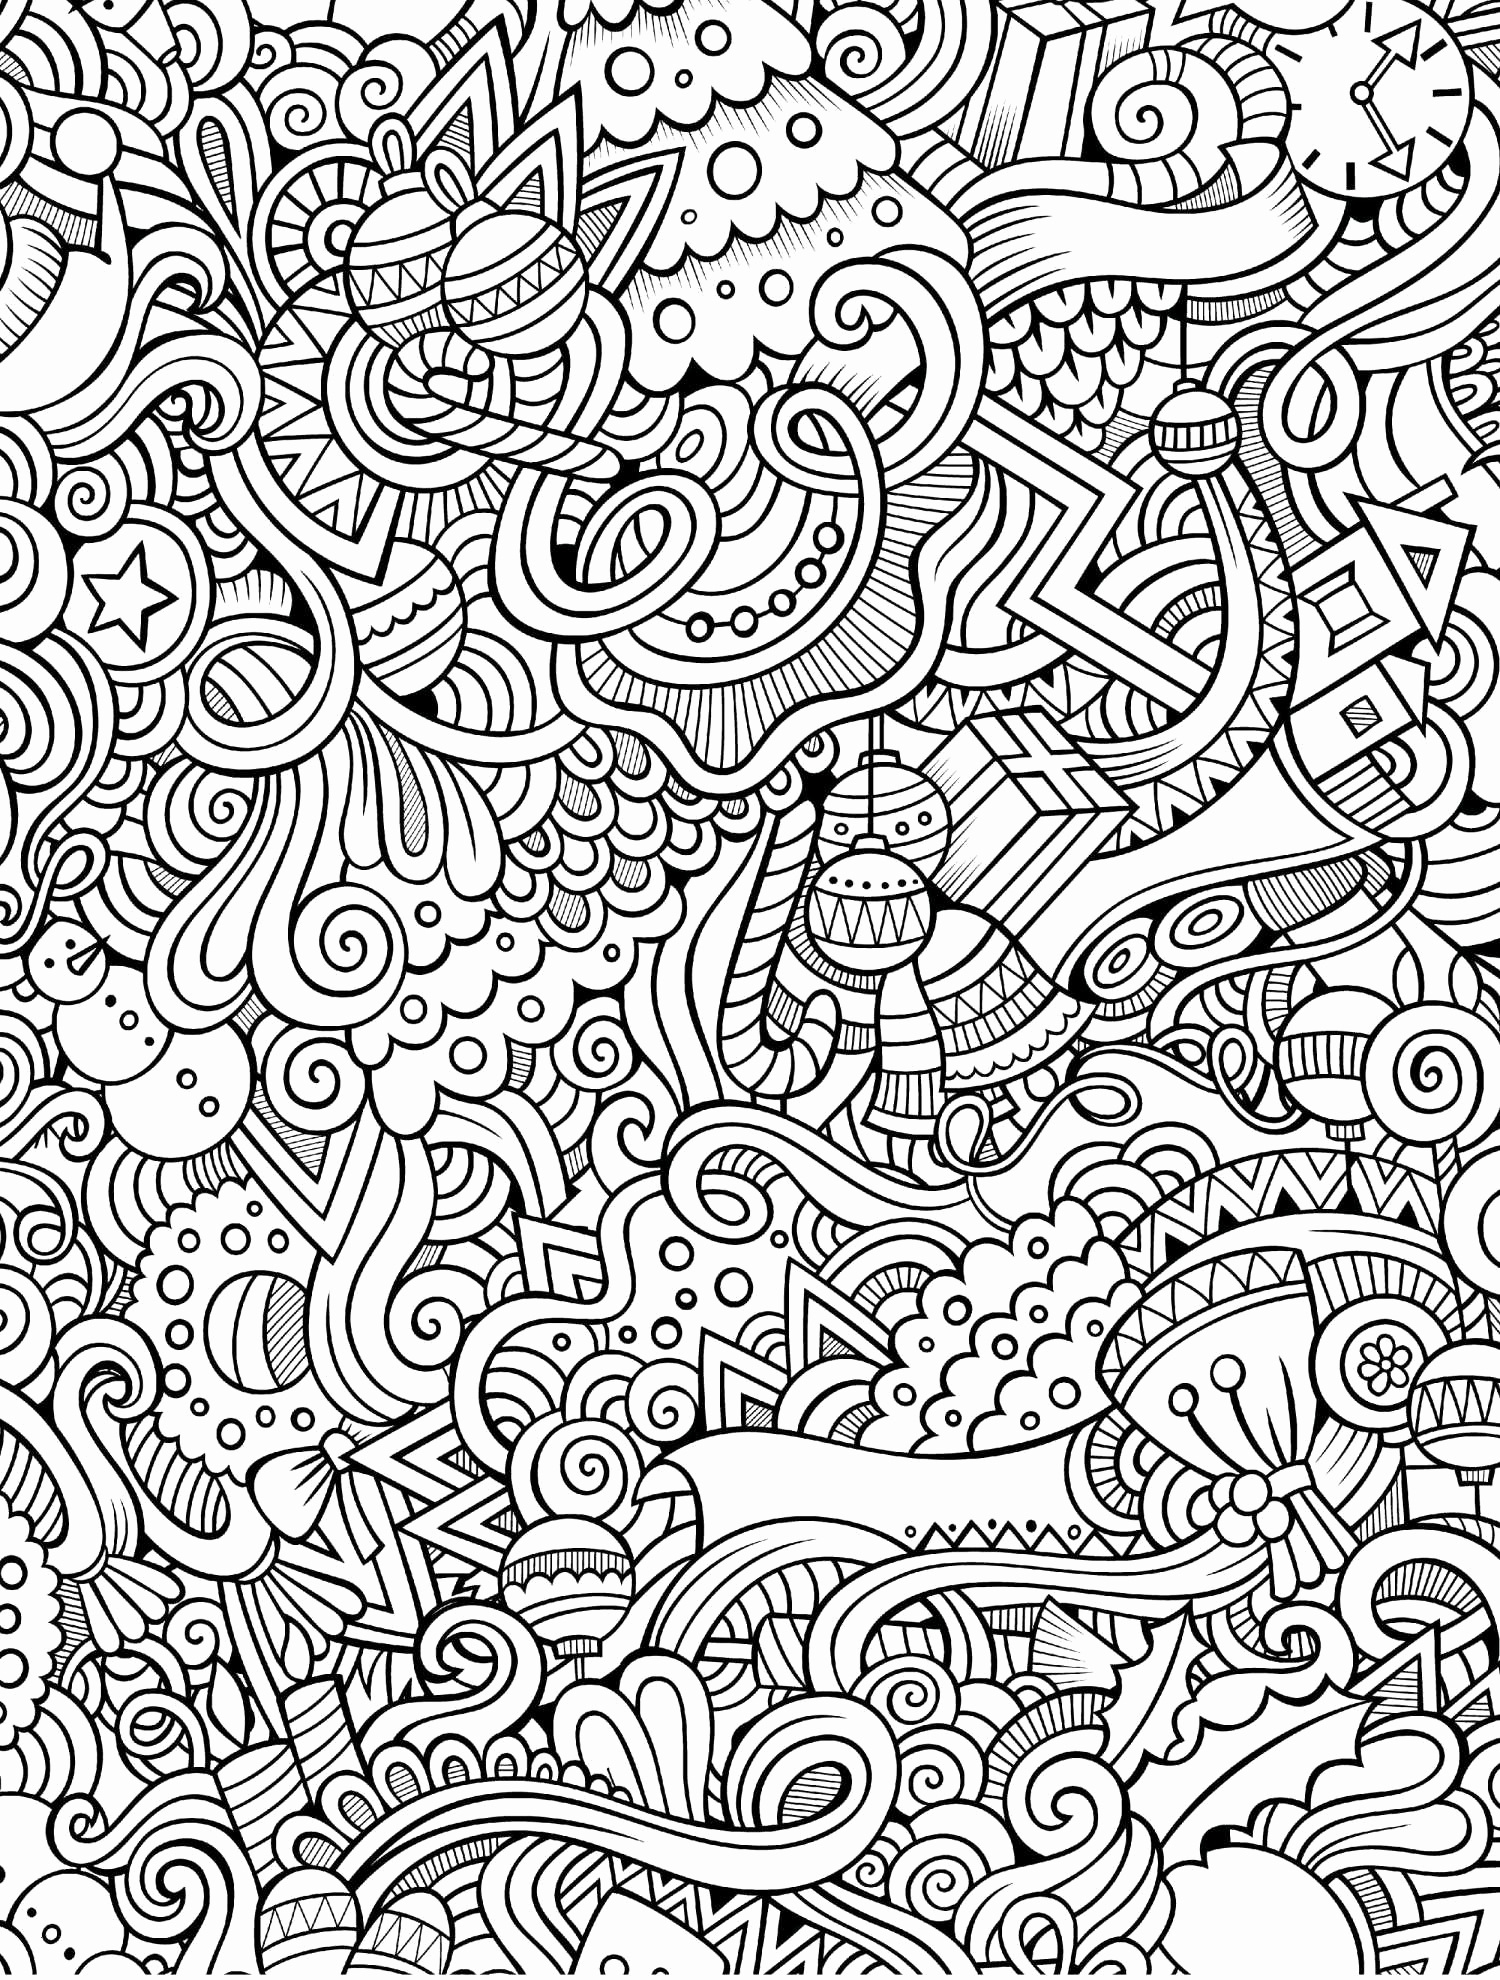 Coloring Pages : Free Printable Coloring Books Pdf Liberty Kids - Free Printable Coloring Books Pdf